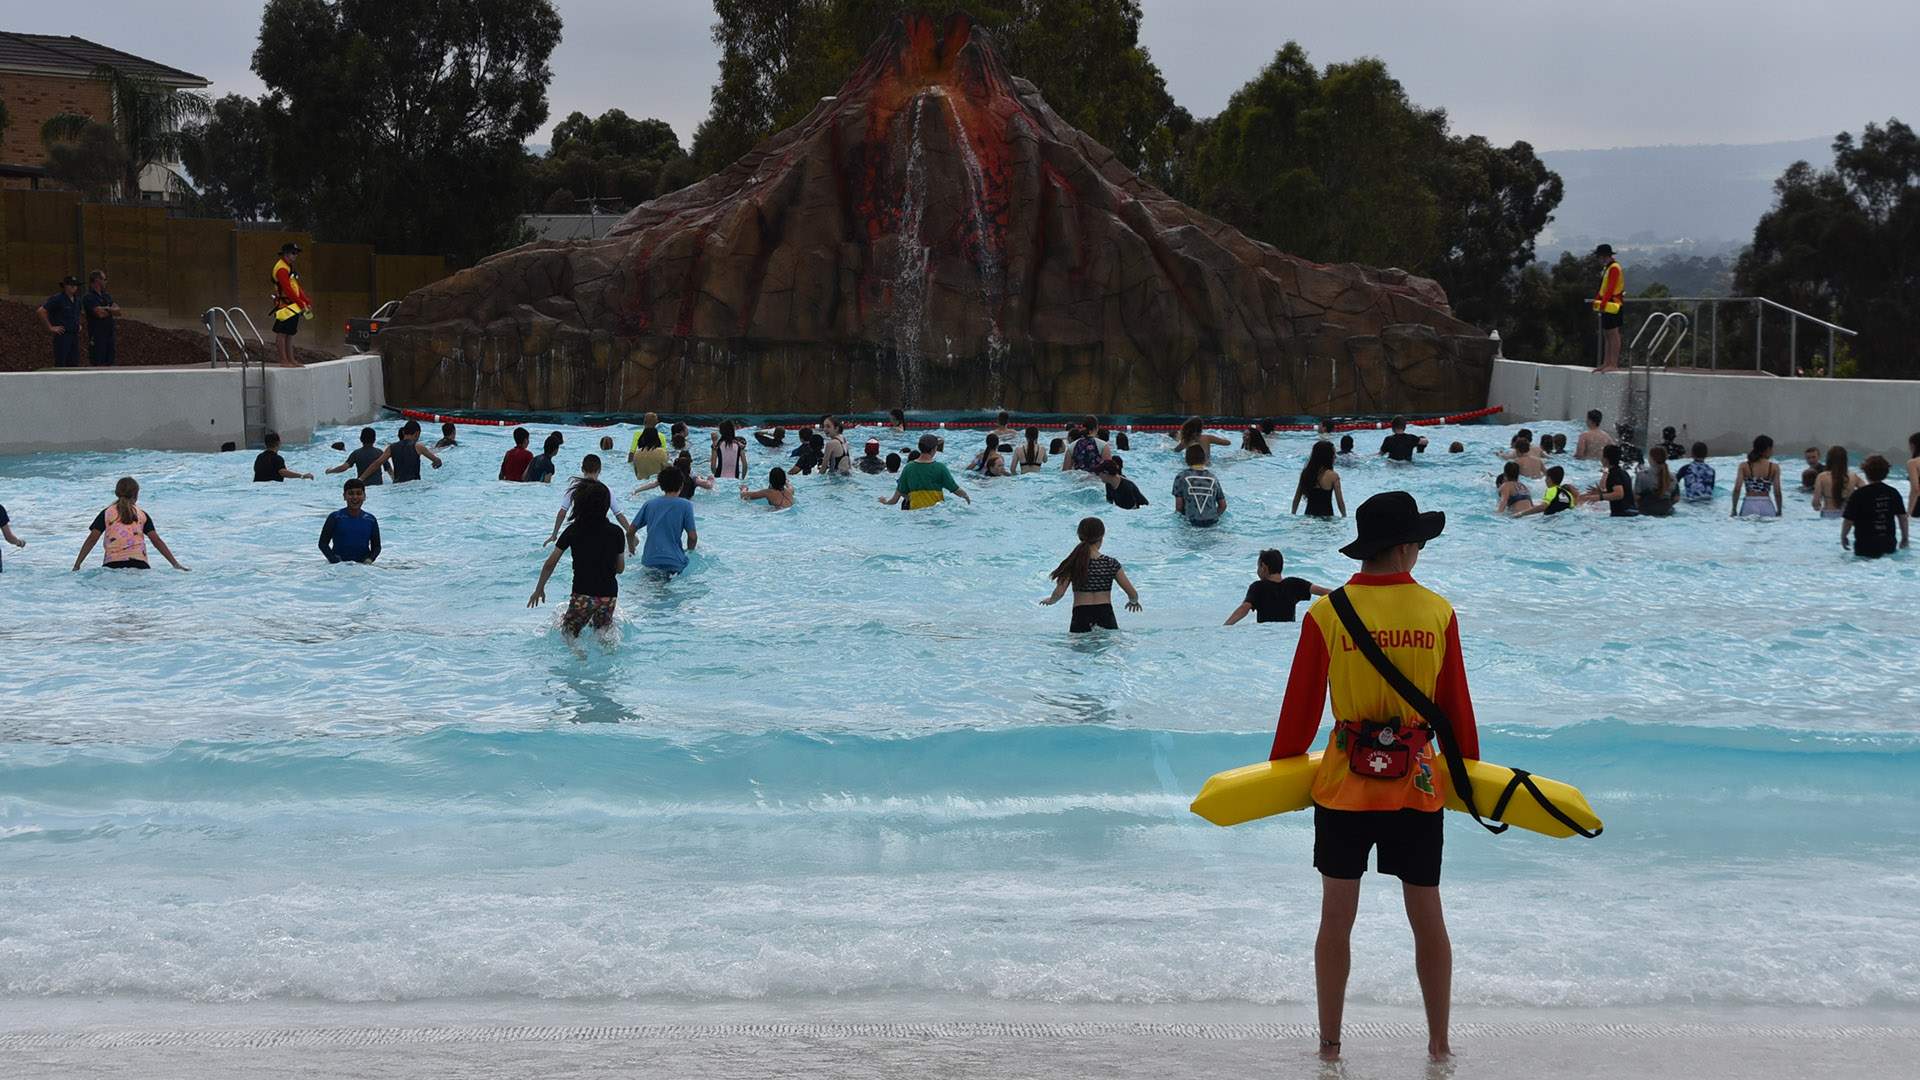 Melbourne's First Outdoor Heated Wave Pool Is Now Open